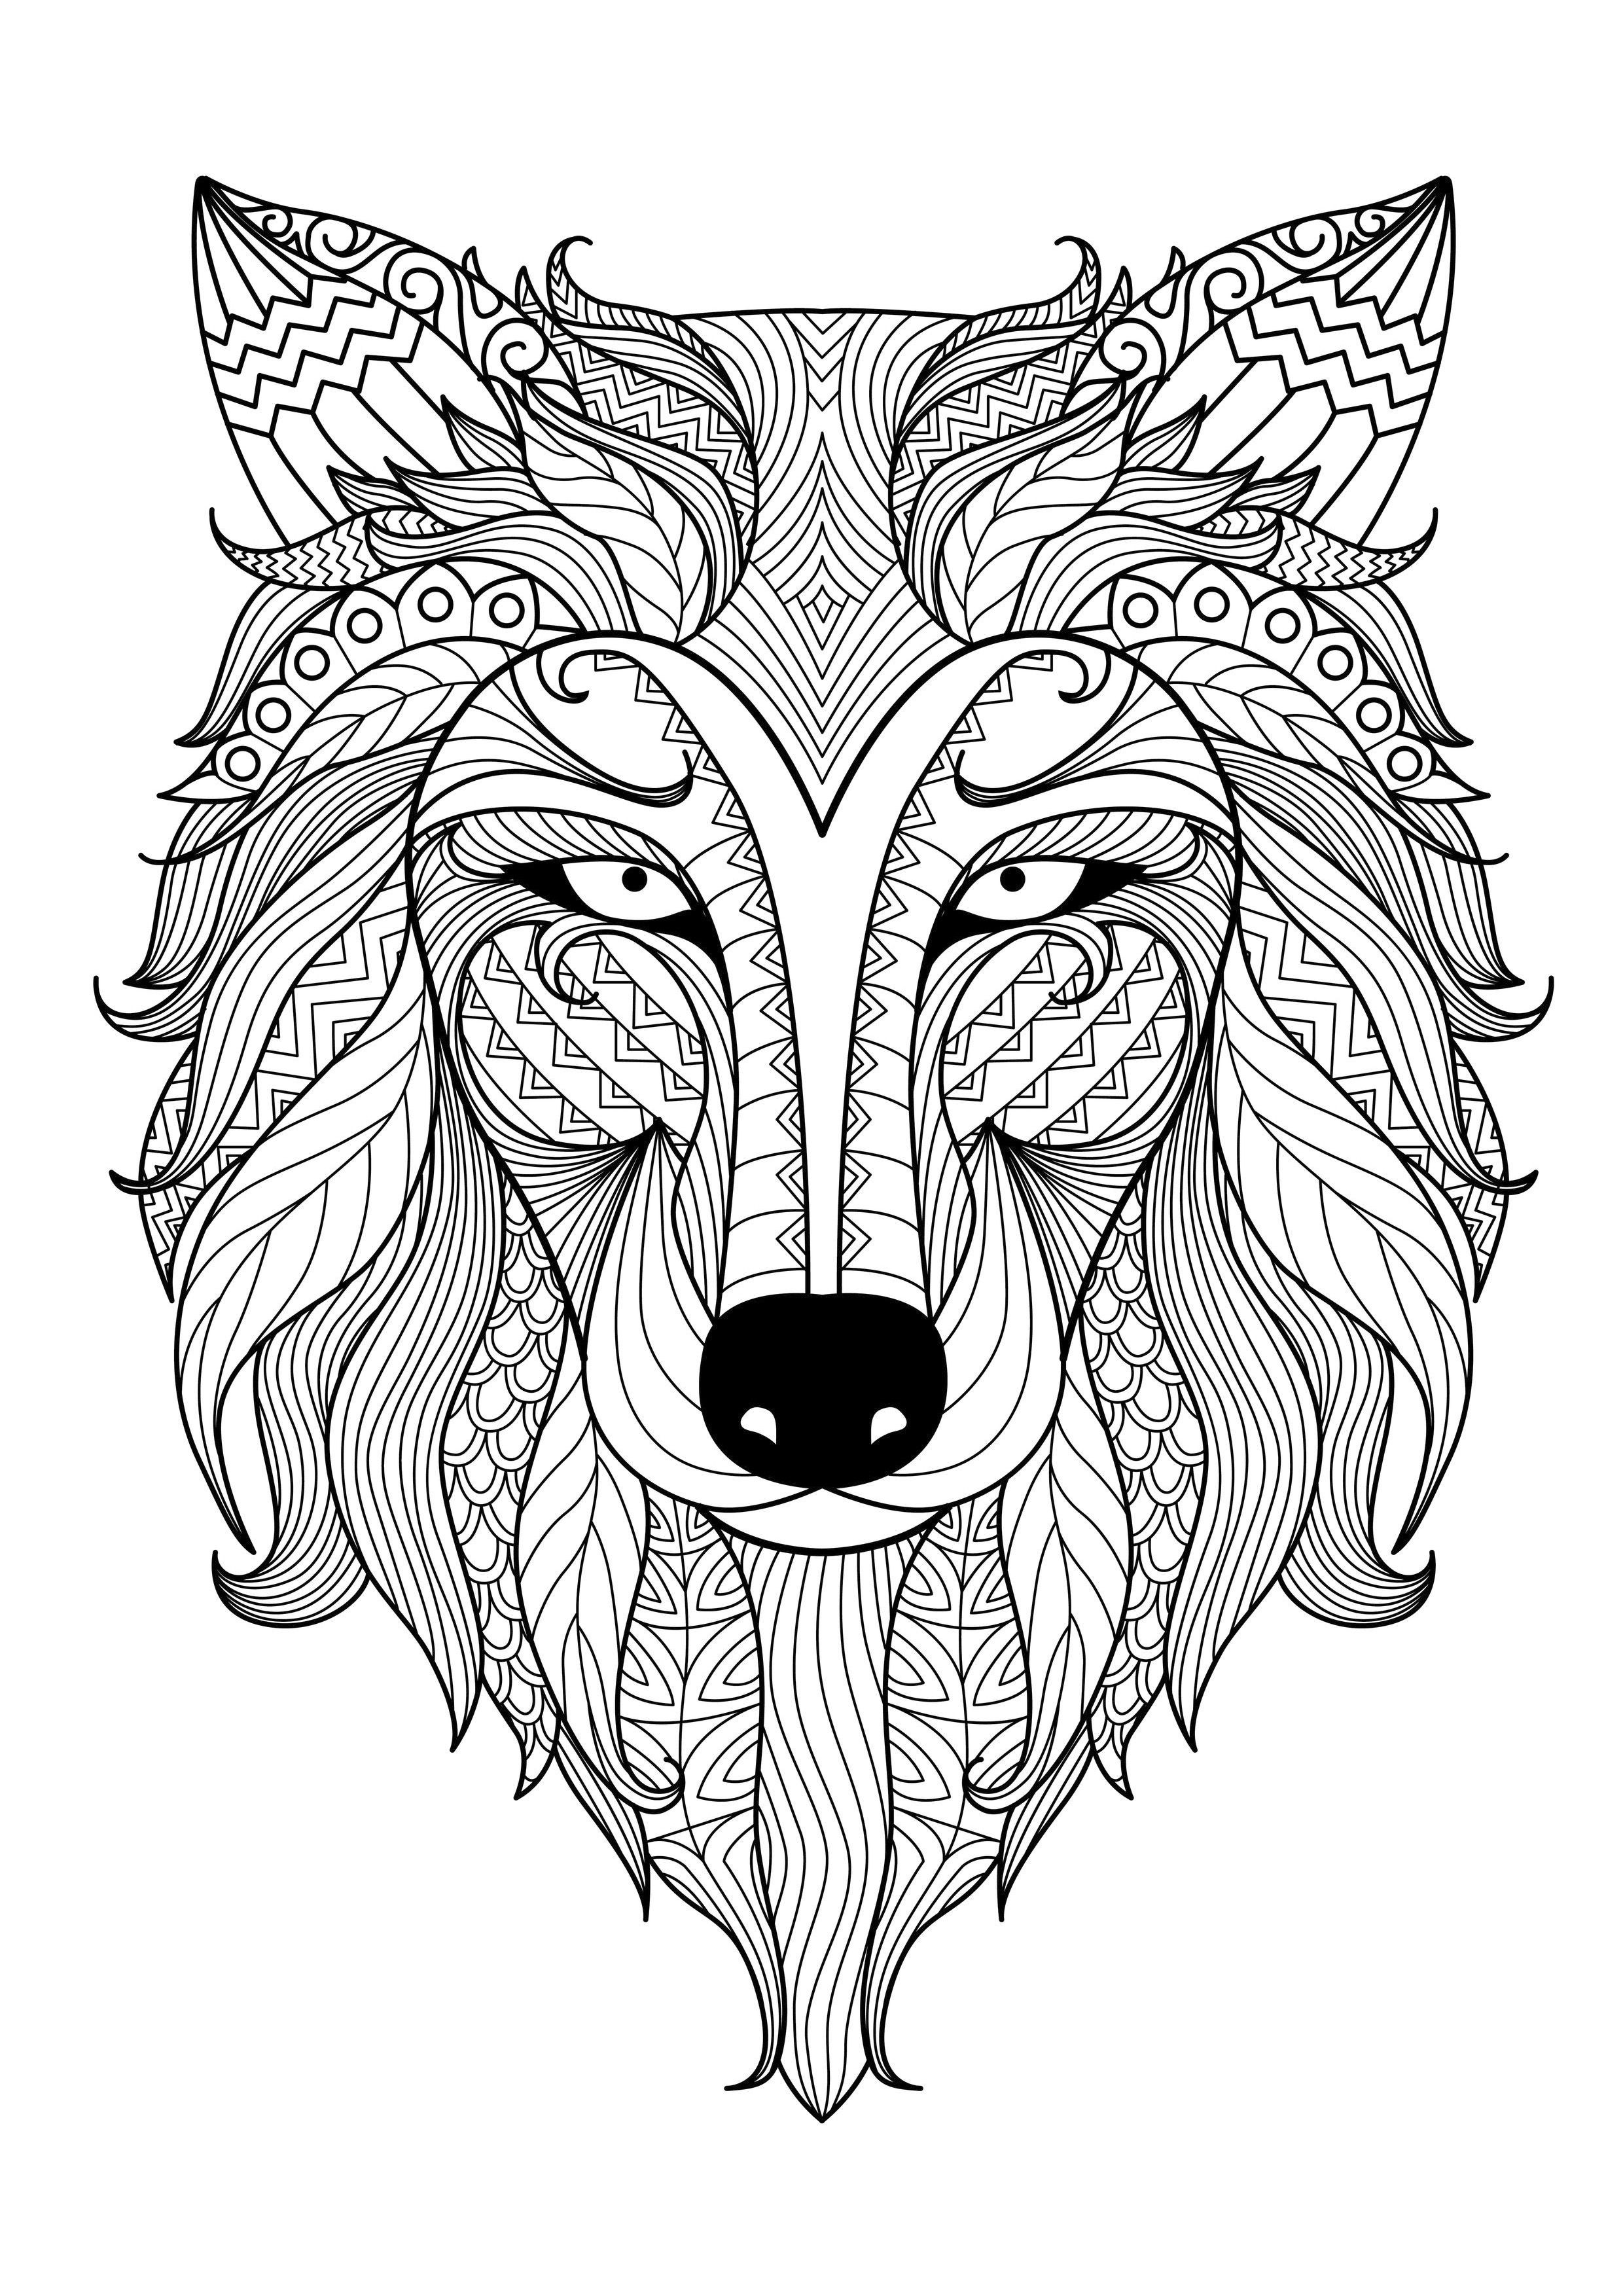 Free coloring page coloring incredible wolf by bimdeedee Incredible adult coloring page of a Wolf by Bimdeedee Source 123rf